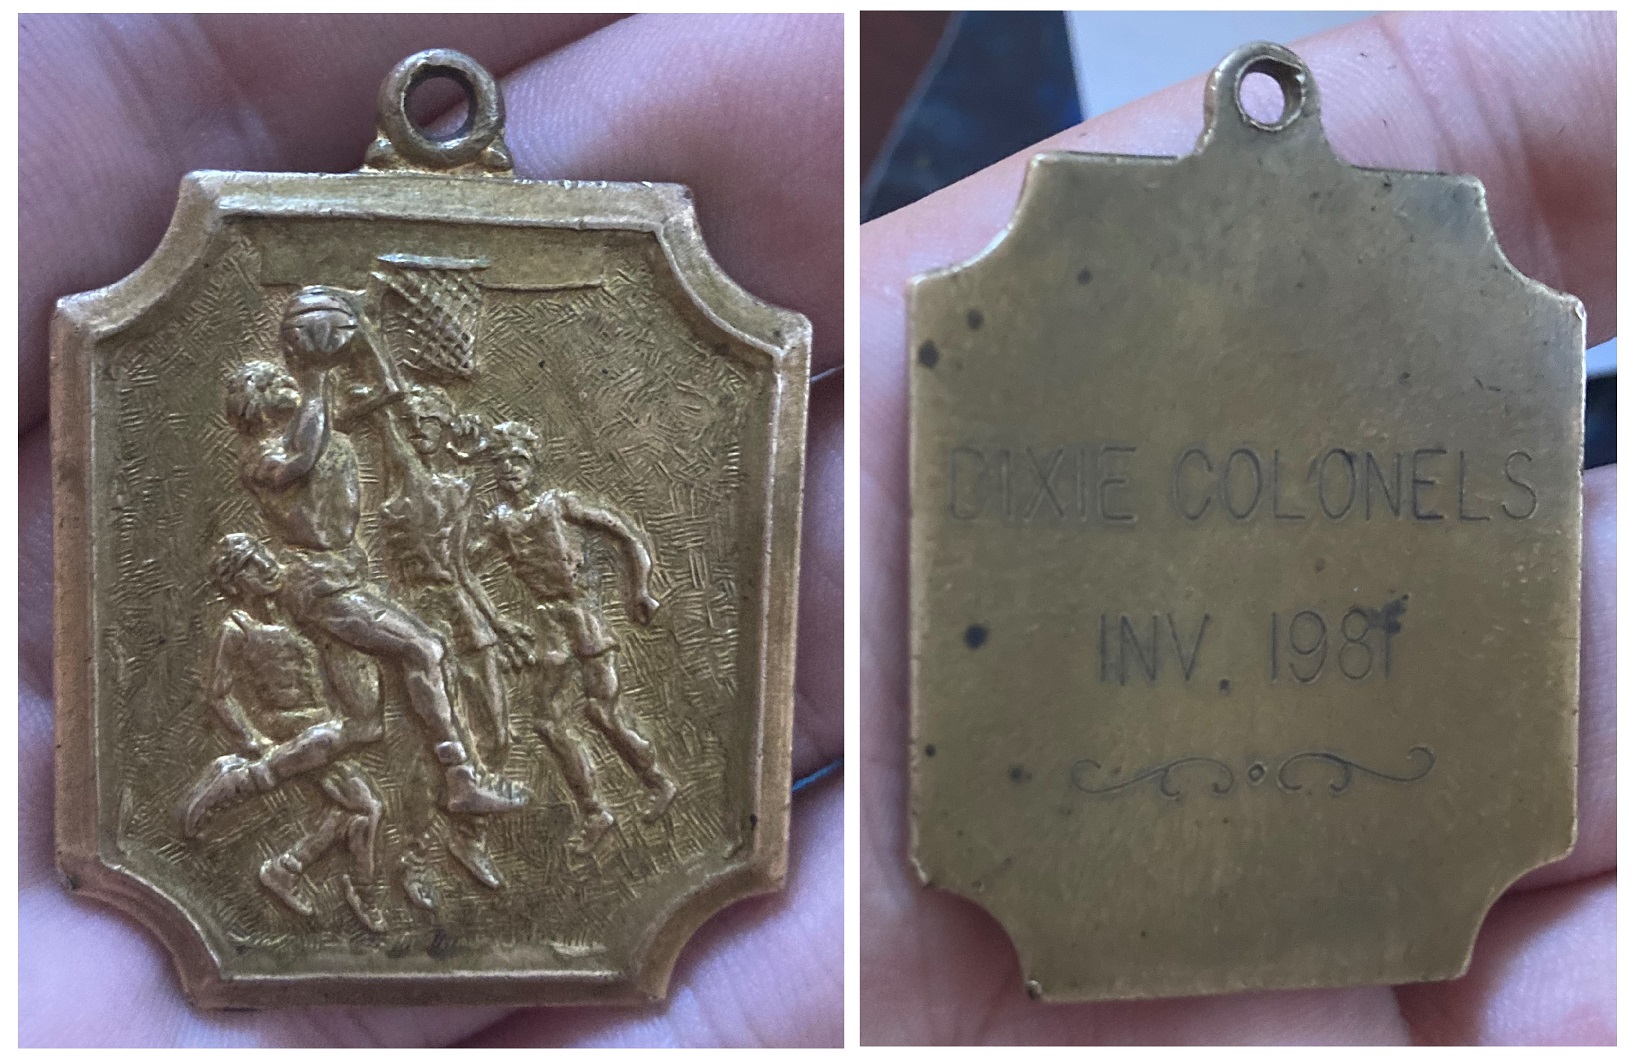 1981 Dixie Colonels Invitational Basketball Tournament medal